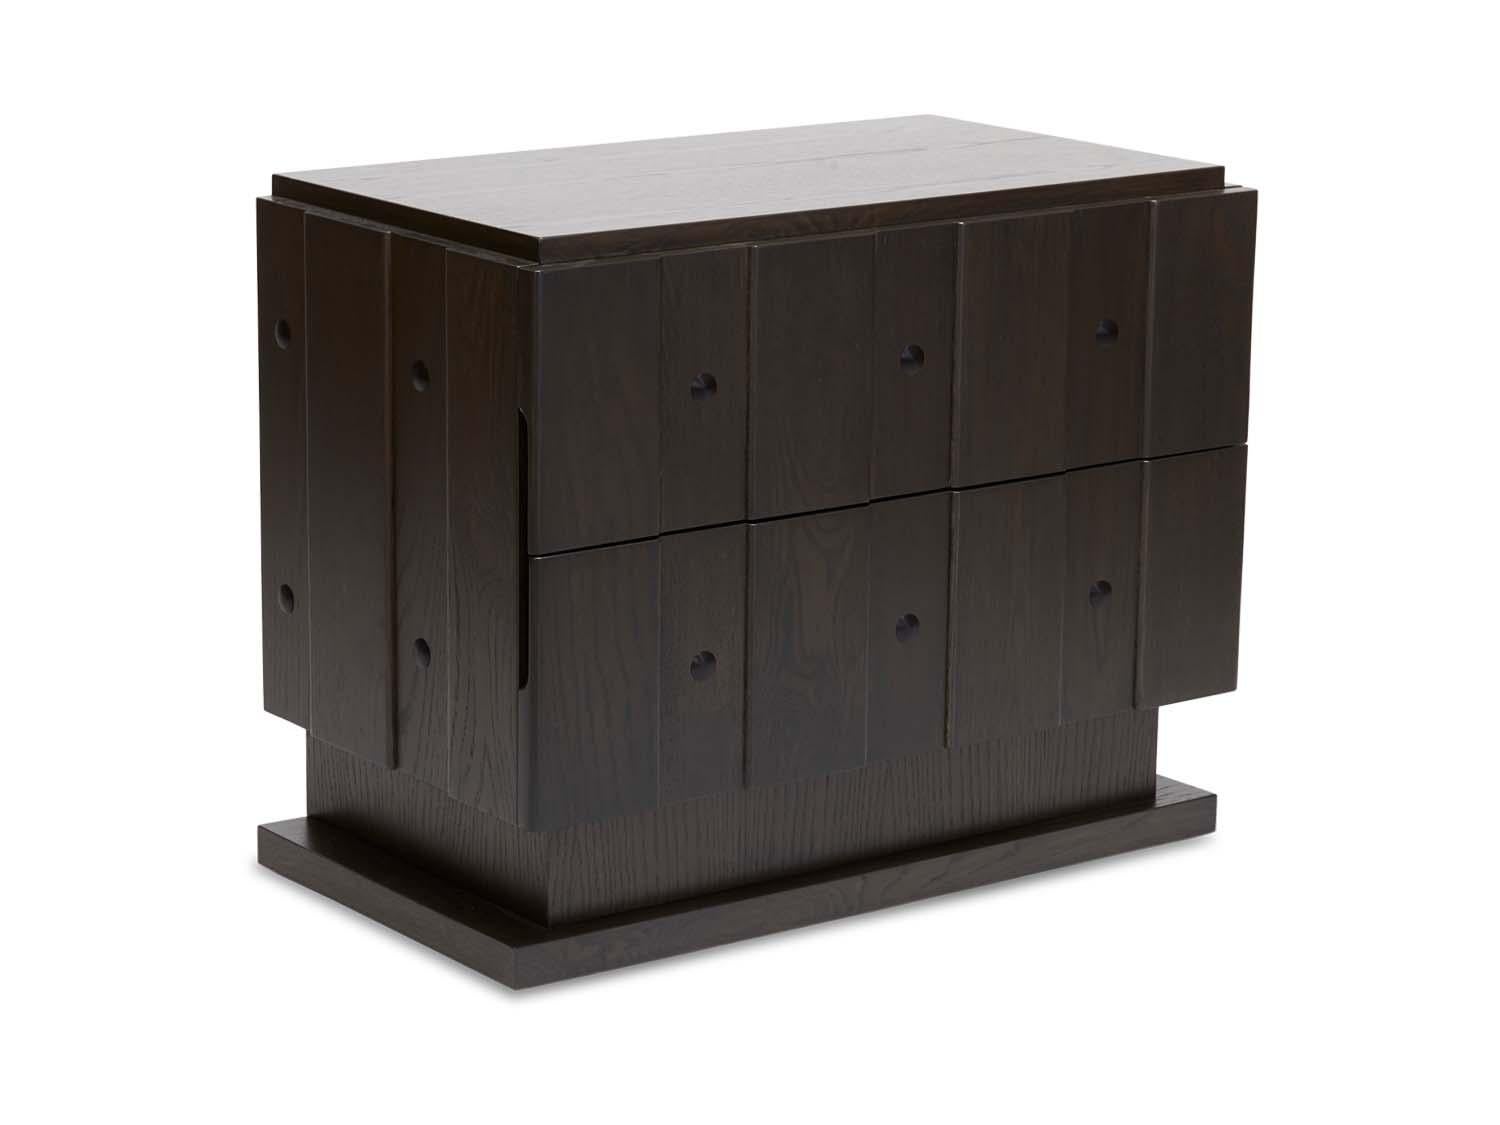 The Ojai nightstand features board and batten doors with iron details and two drawers. Available in two sizes and in American walnut and white oak.

Inspired by the refined simplicity and subtle detailing of early 20th century Swedish furniture